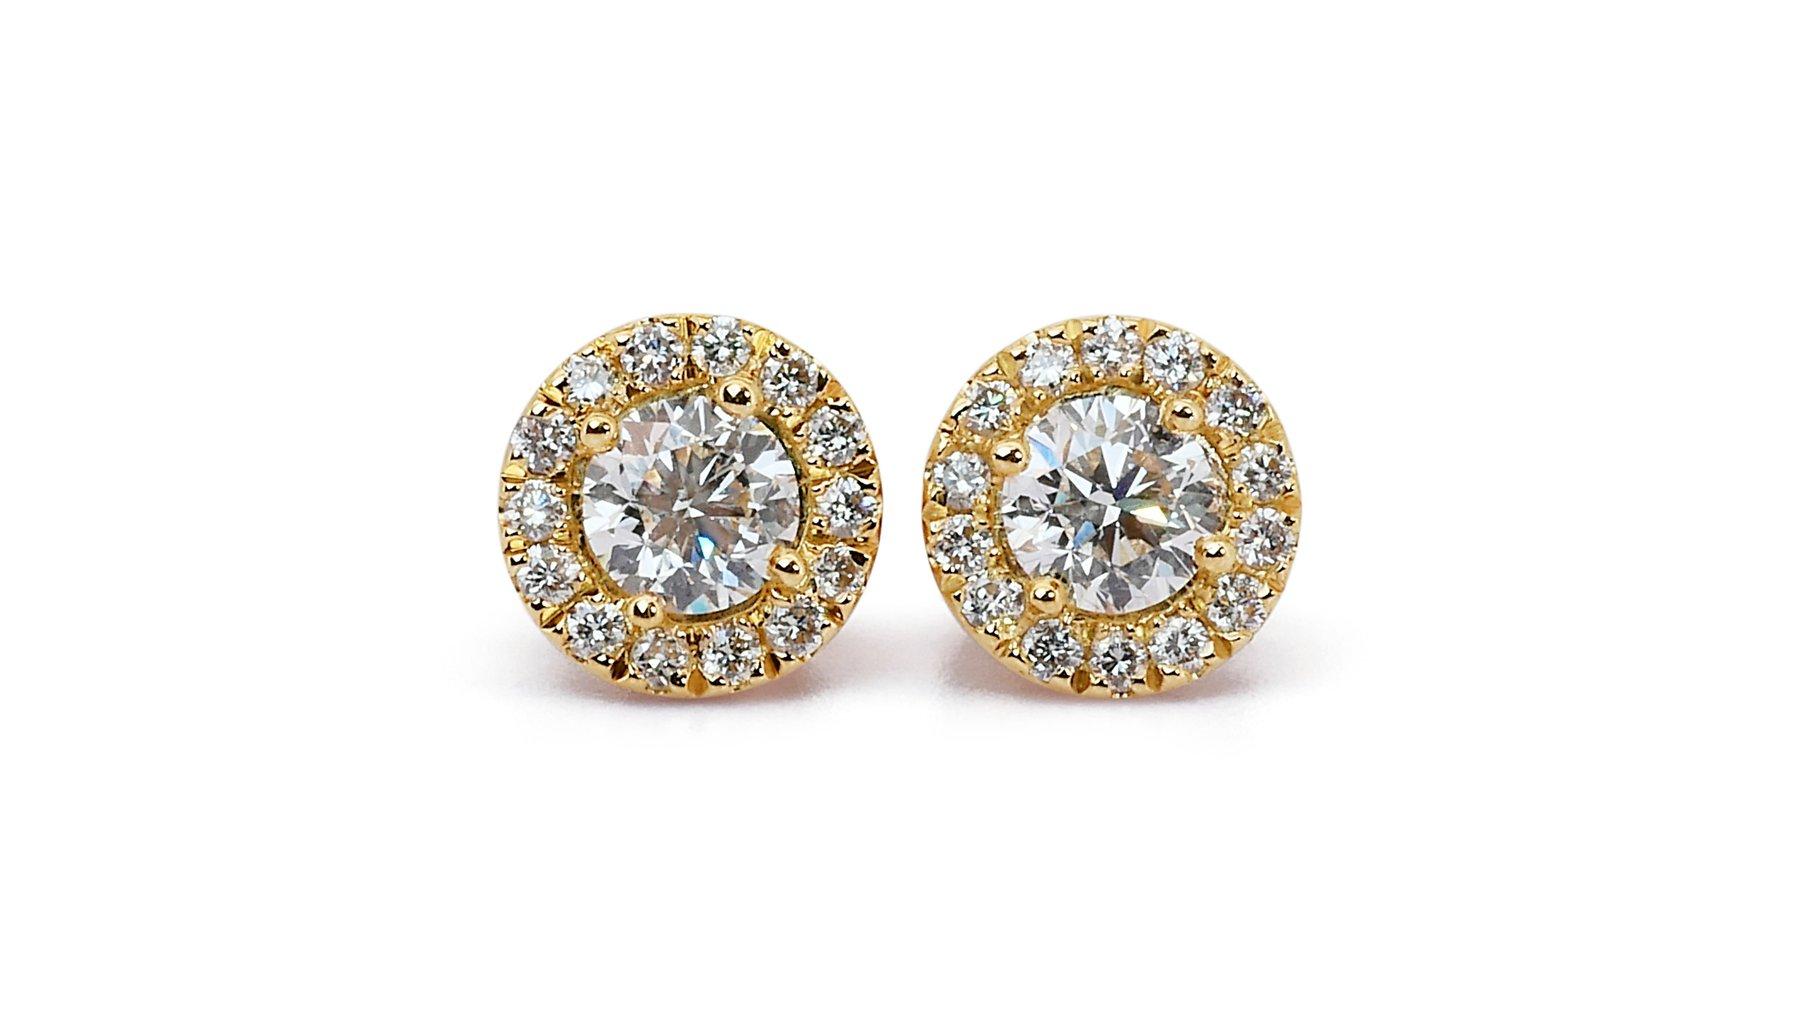 1.22 Carat Round Brilliant Diamond Earrings with GIA Certificate

These beautiful earrings feature a dazzling 1.22 carat round brilliant natural diamond in each ear. The diamonds are I in color and VVS2 in clarity, making them virtually flawless to